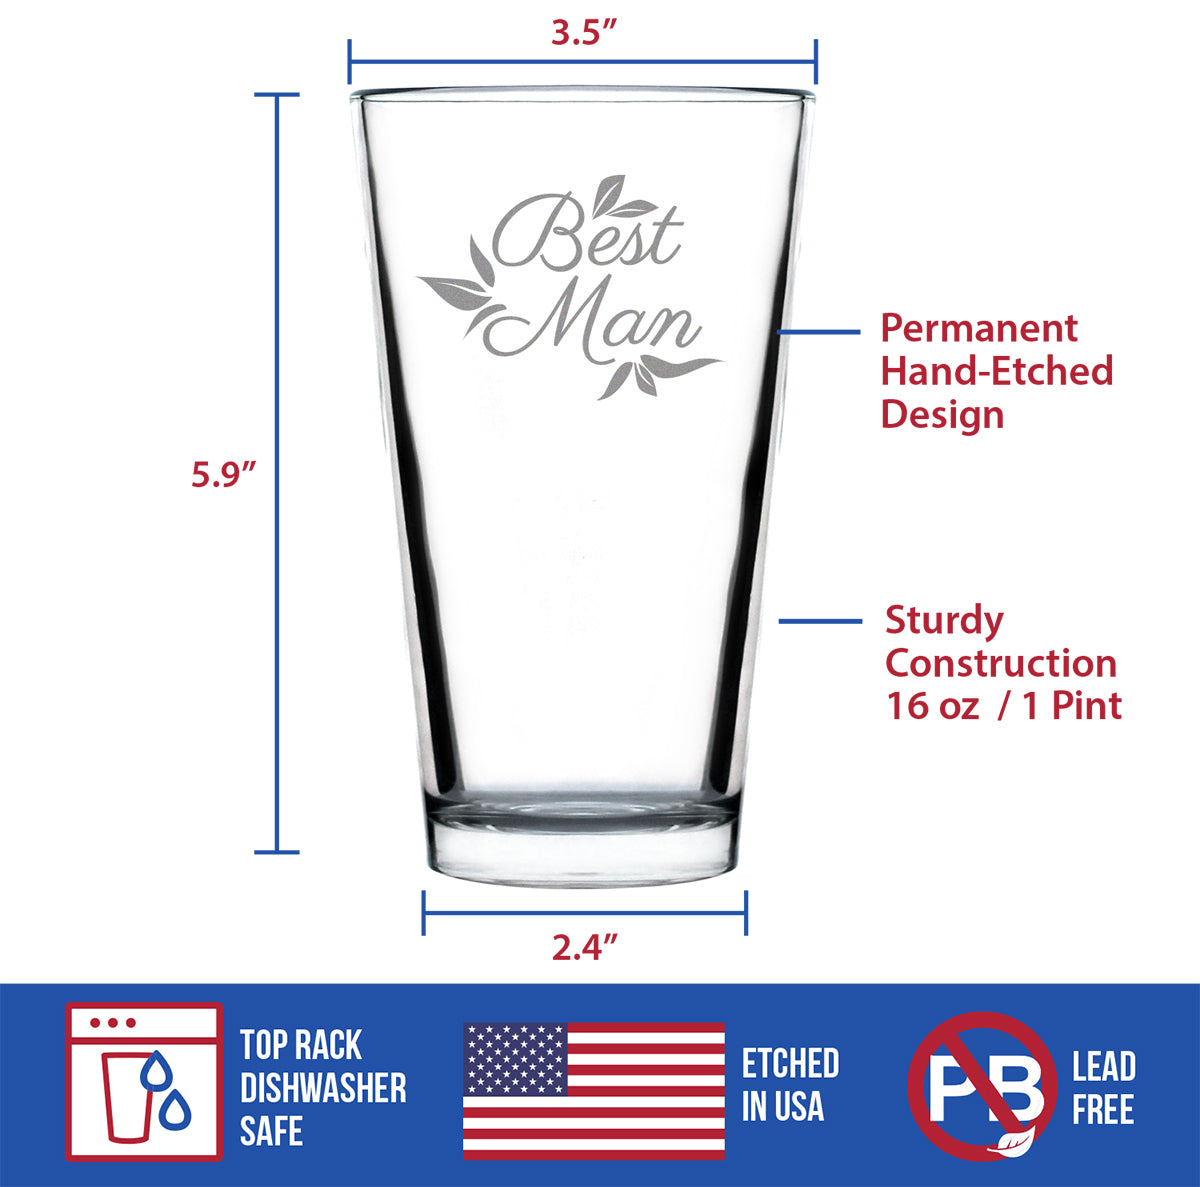 Best Man Pint Glass - Groomsmen Proposal Gifts - Unique Engraved Wedding Cup Gift